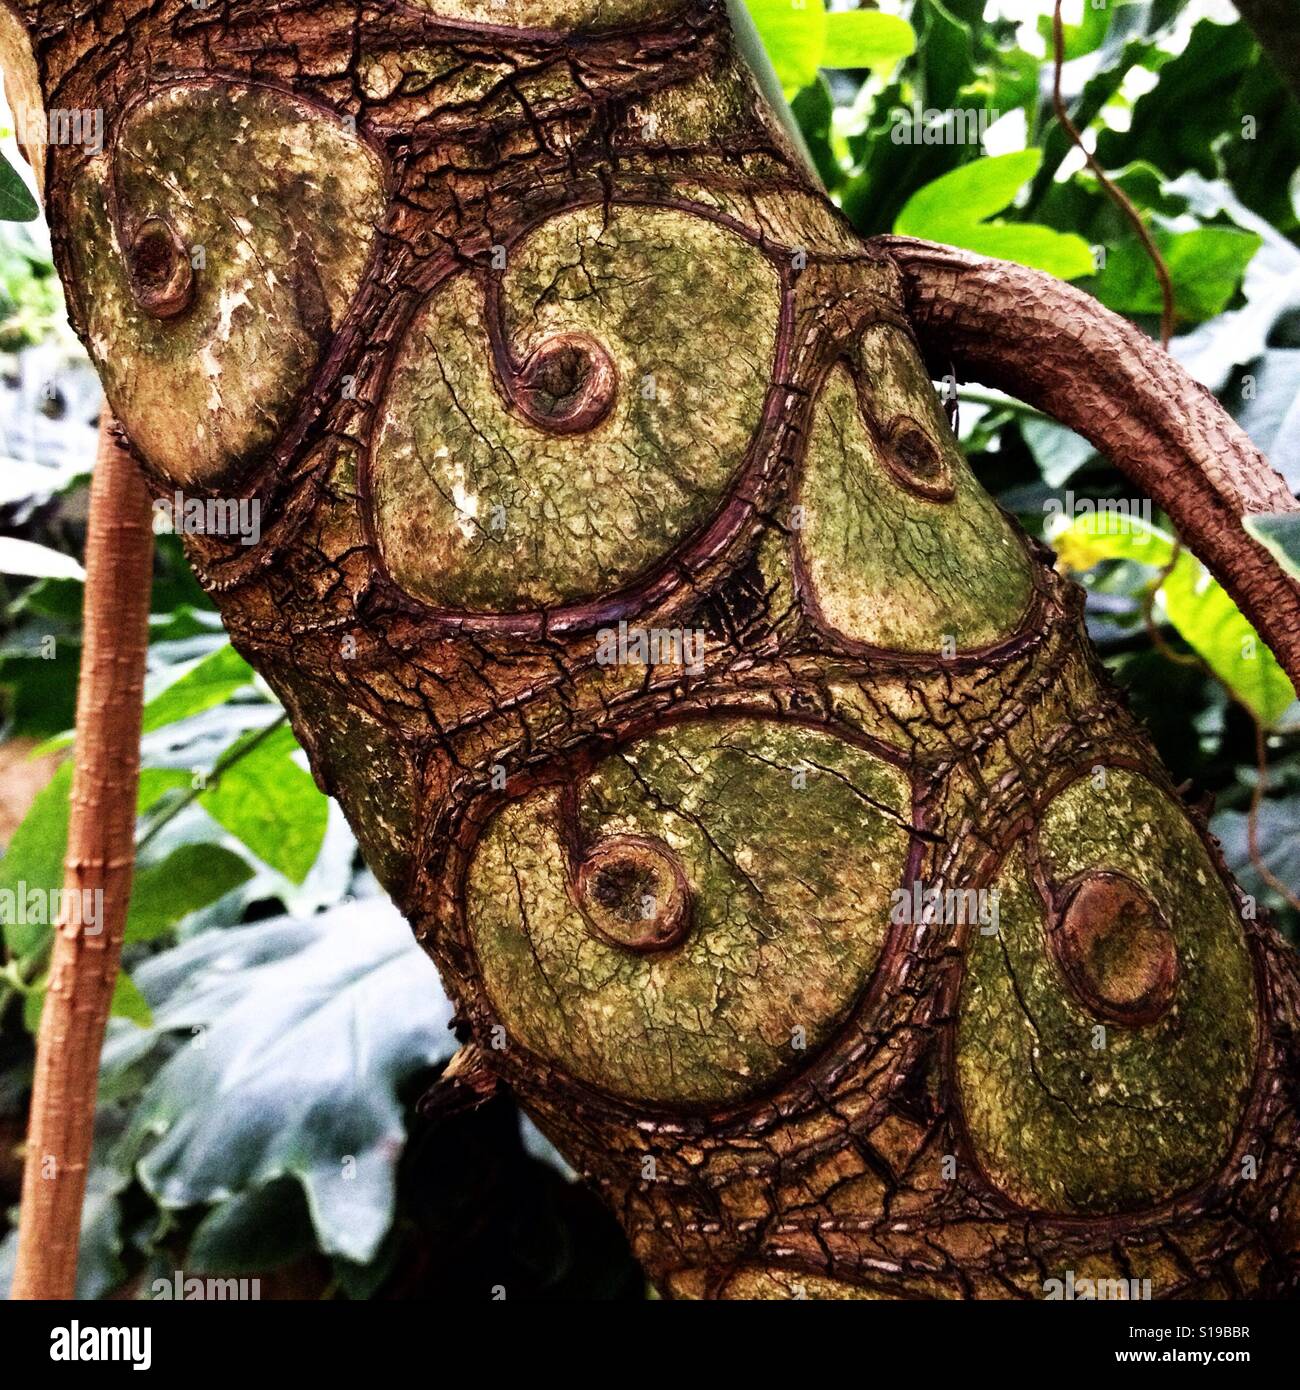 Tree trunk with unusual circular markings on bark. Saturated high-contrast image. Stock Photo